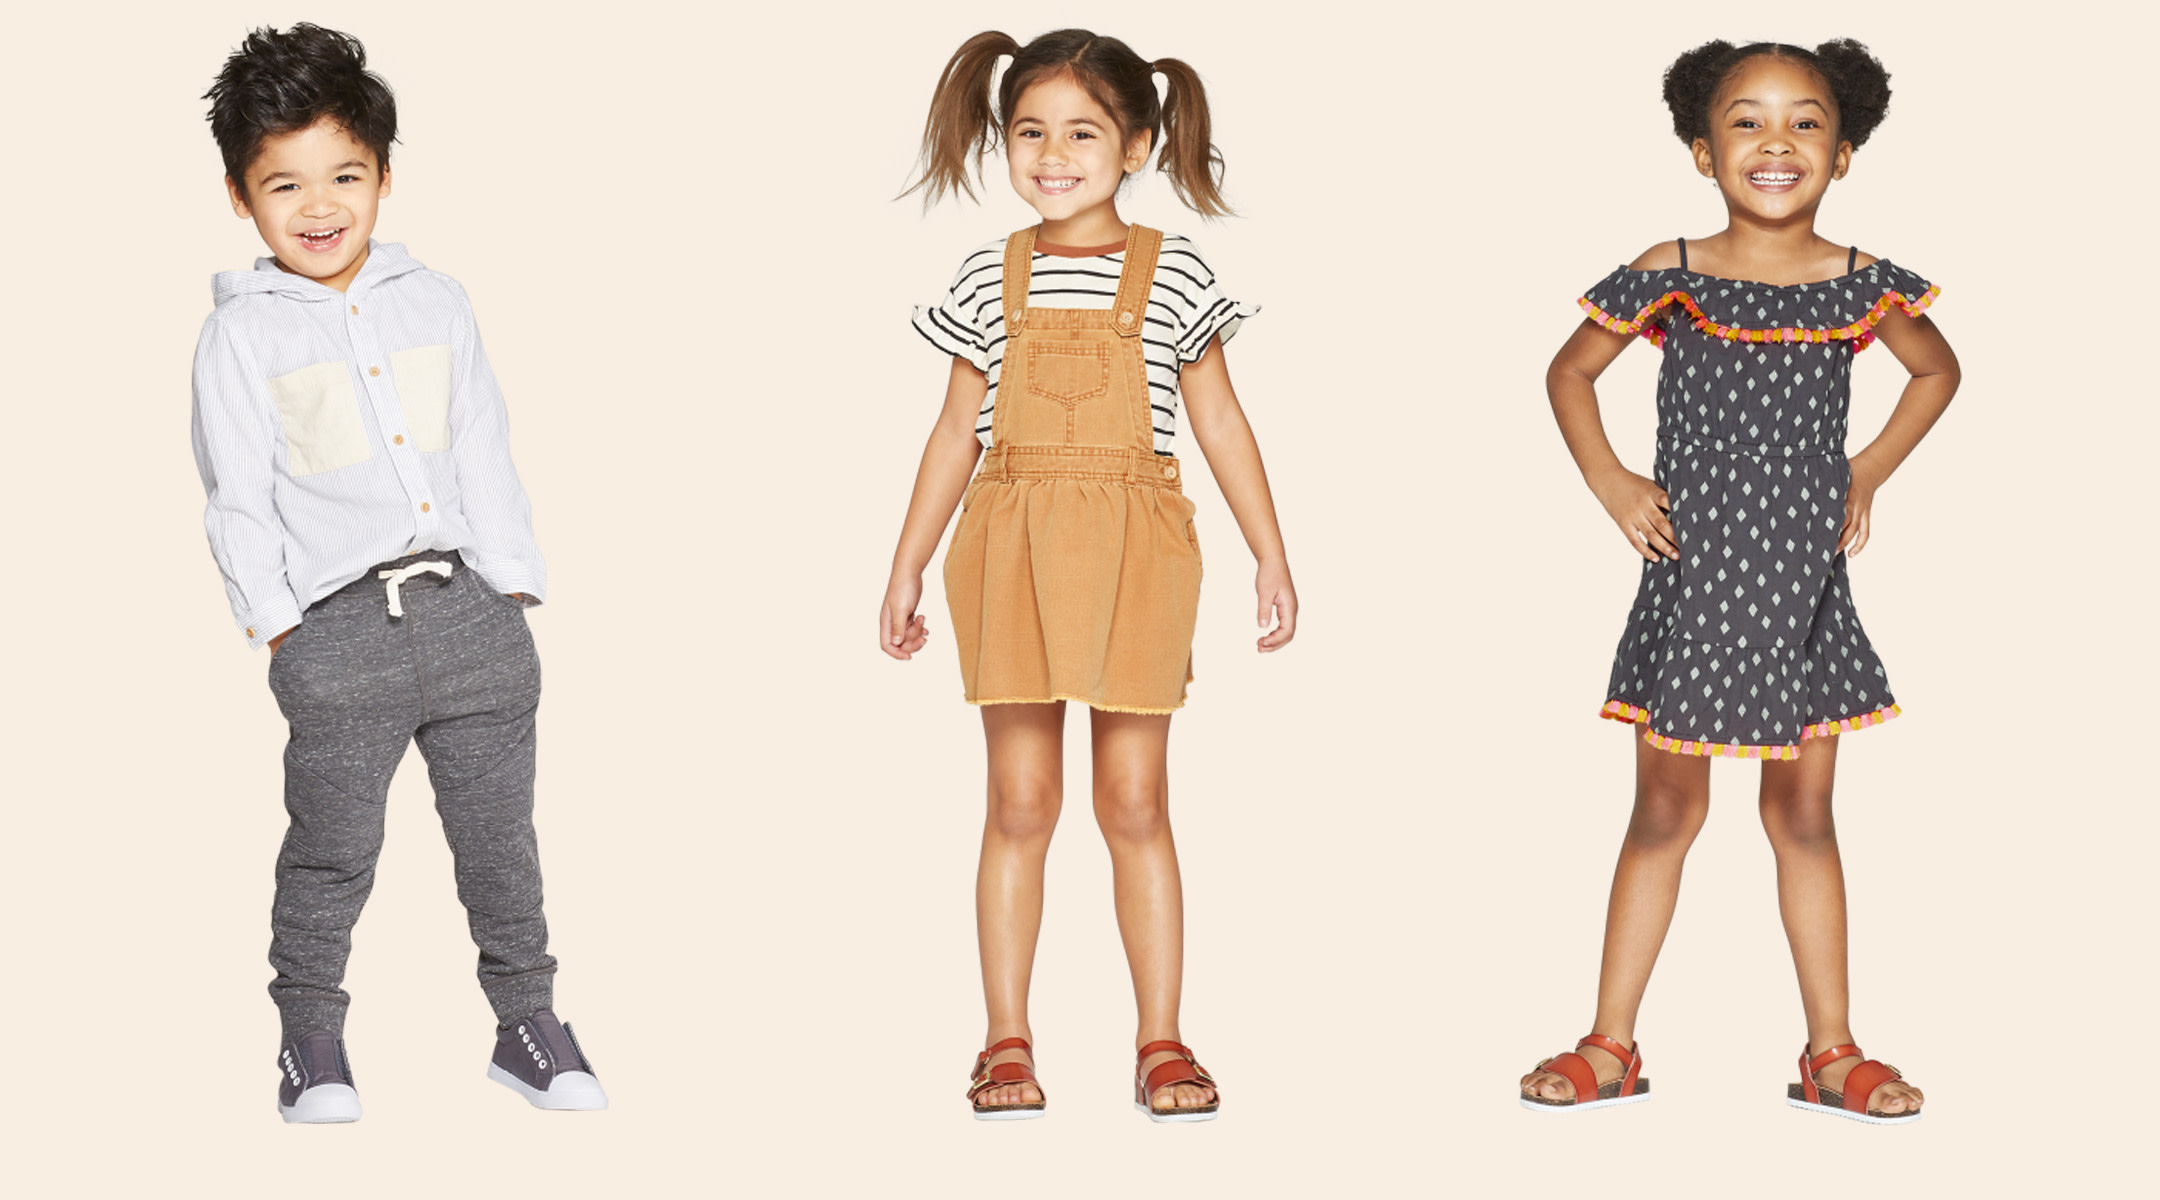 target's la force fashion launches for toddlers